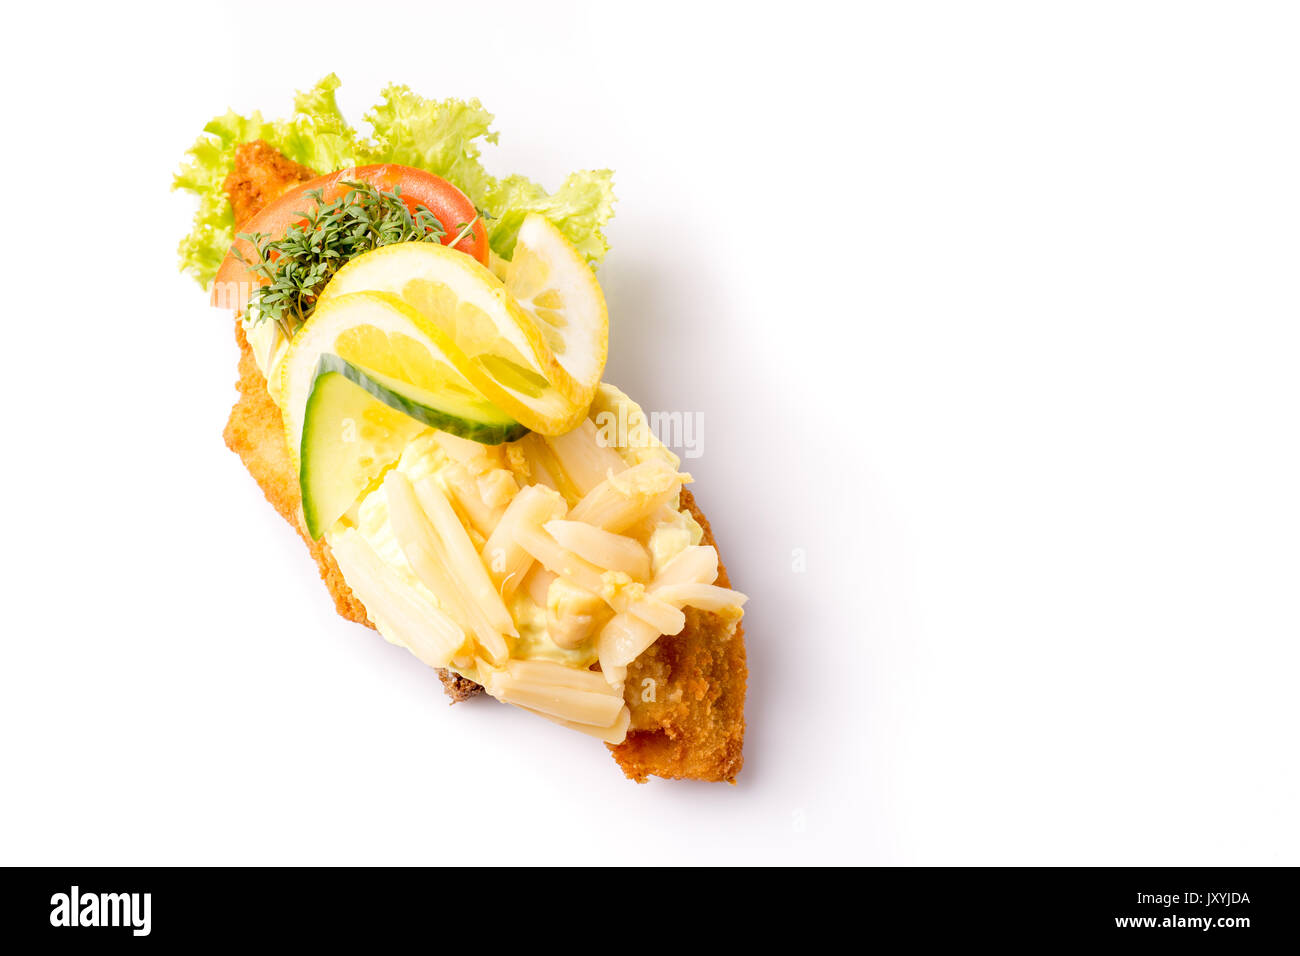 Danish specialties and national dishes, high-quality open sandwich, isolated on white background. fish fillet and garnished with remoulade and lemon Stock Photo